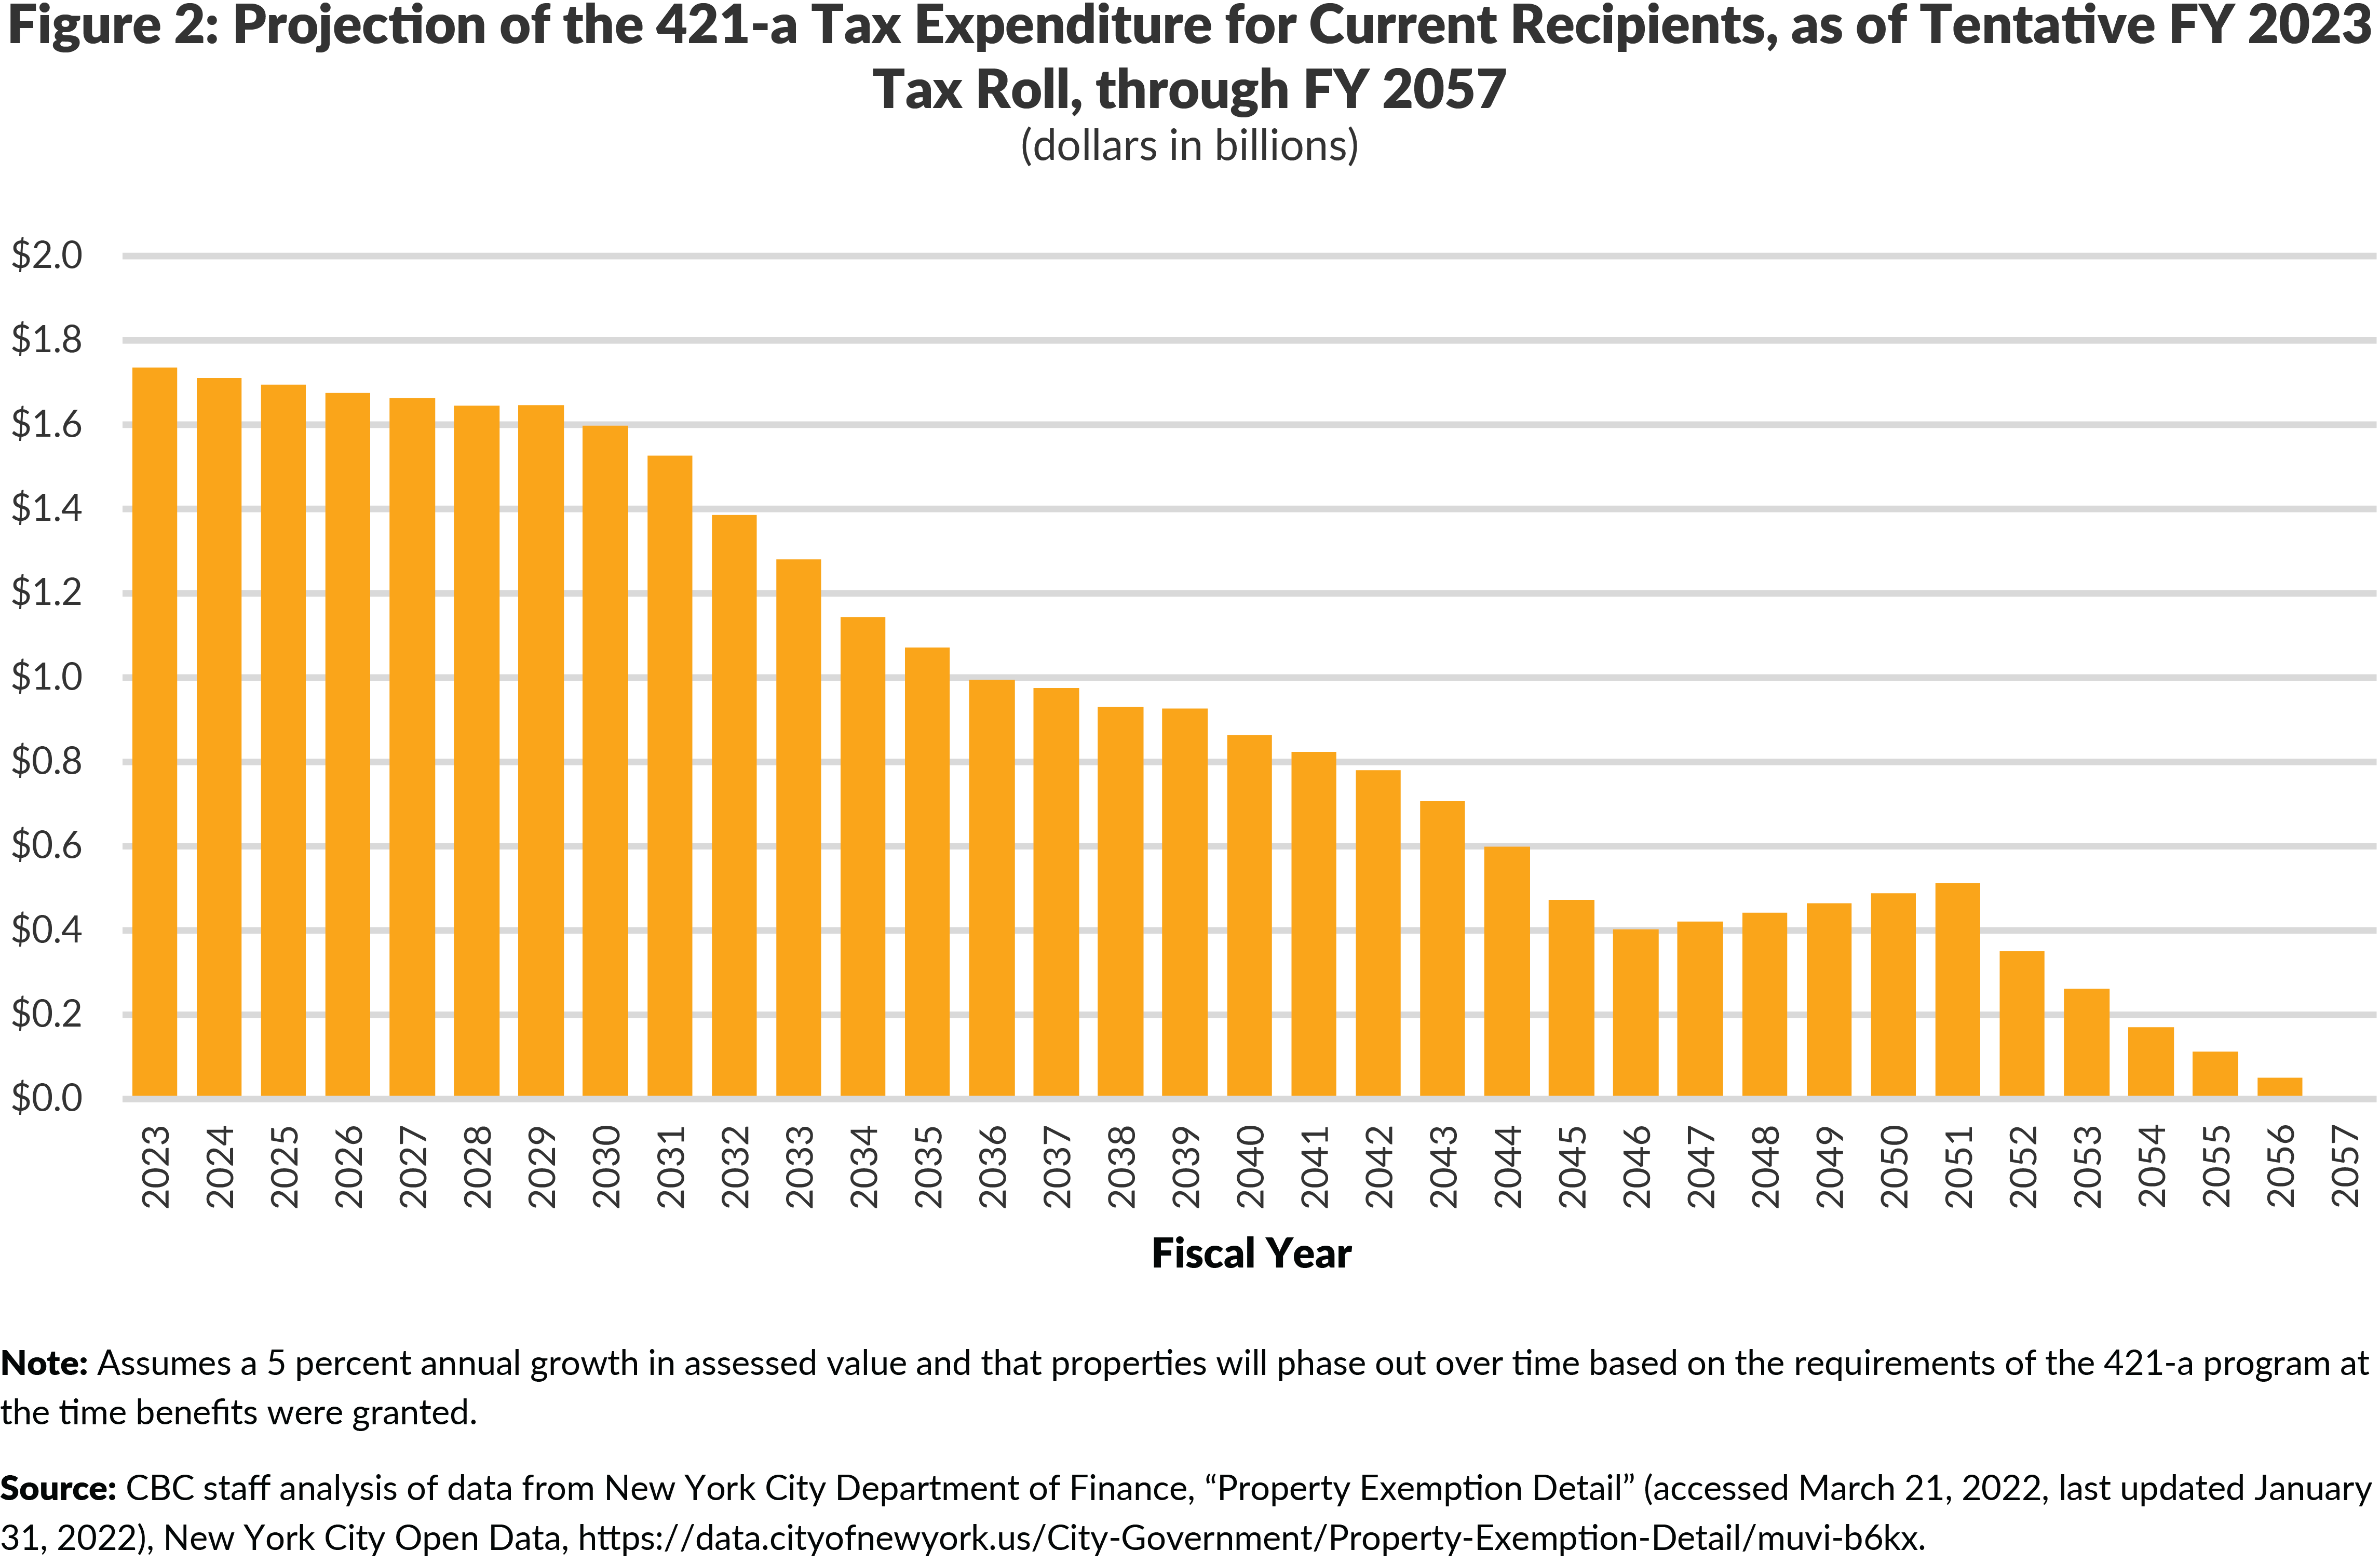 Figure 2: Projection of the 421-a Tax Expenditure for Current Recipients, as of Tentative FY 2023 Tax Roll, through FY 2057